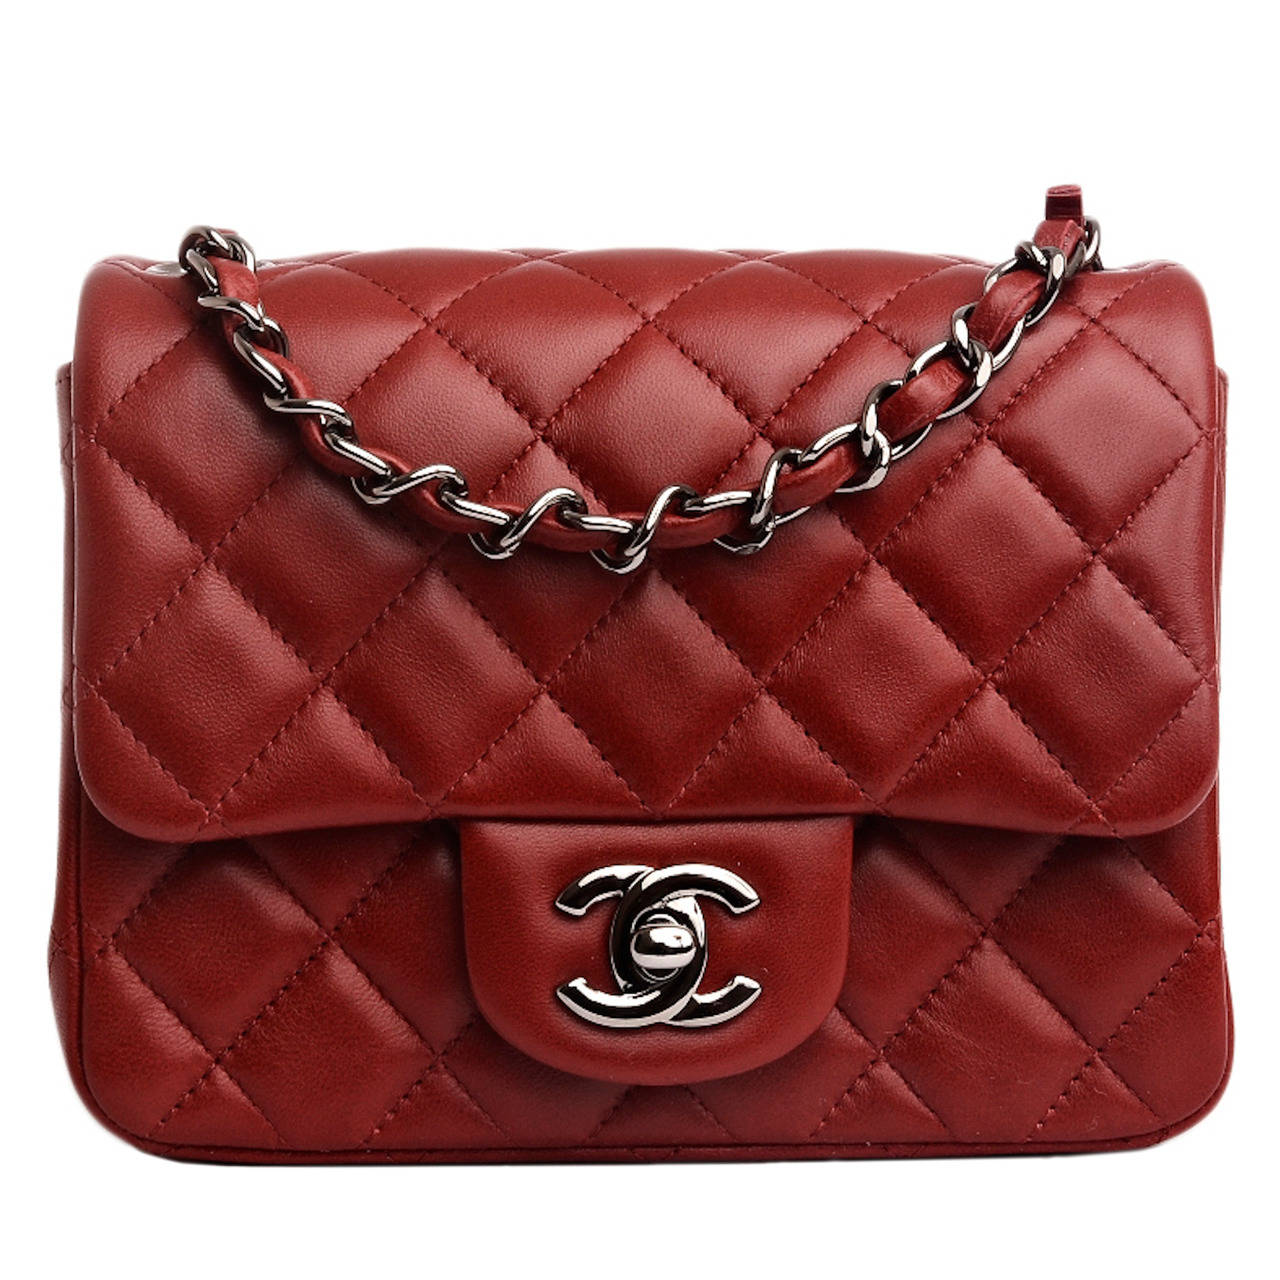 Chanel Dark Red Quilted Lambskin Mini Classic Flap Bag